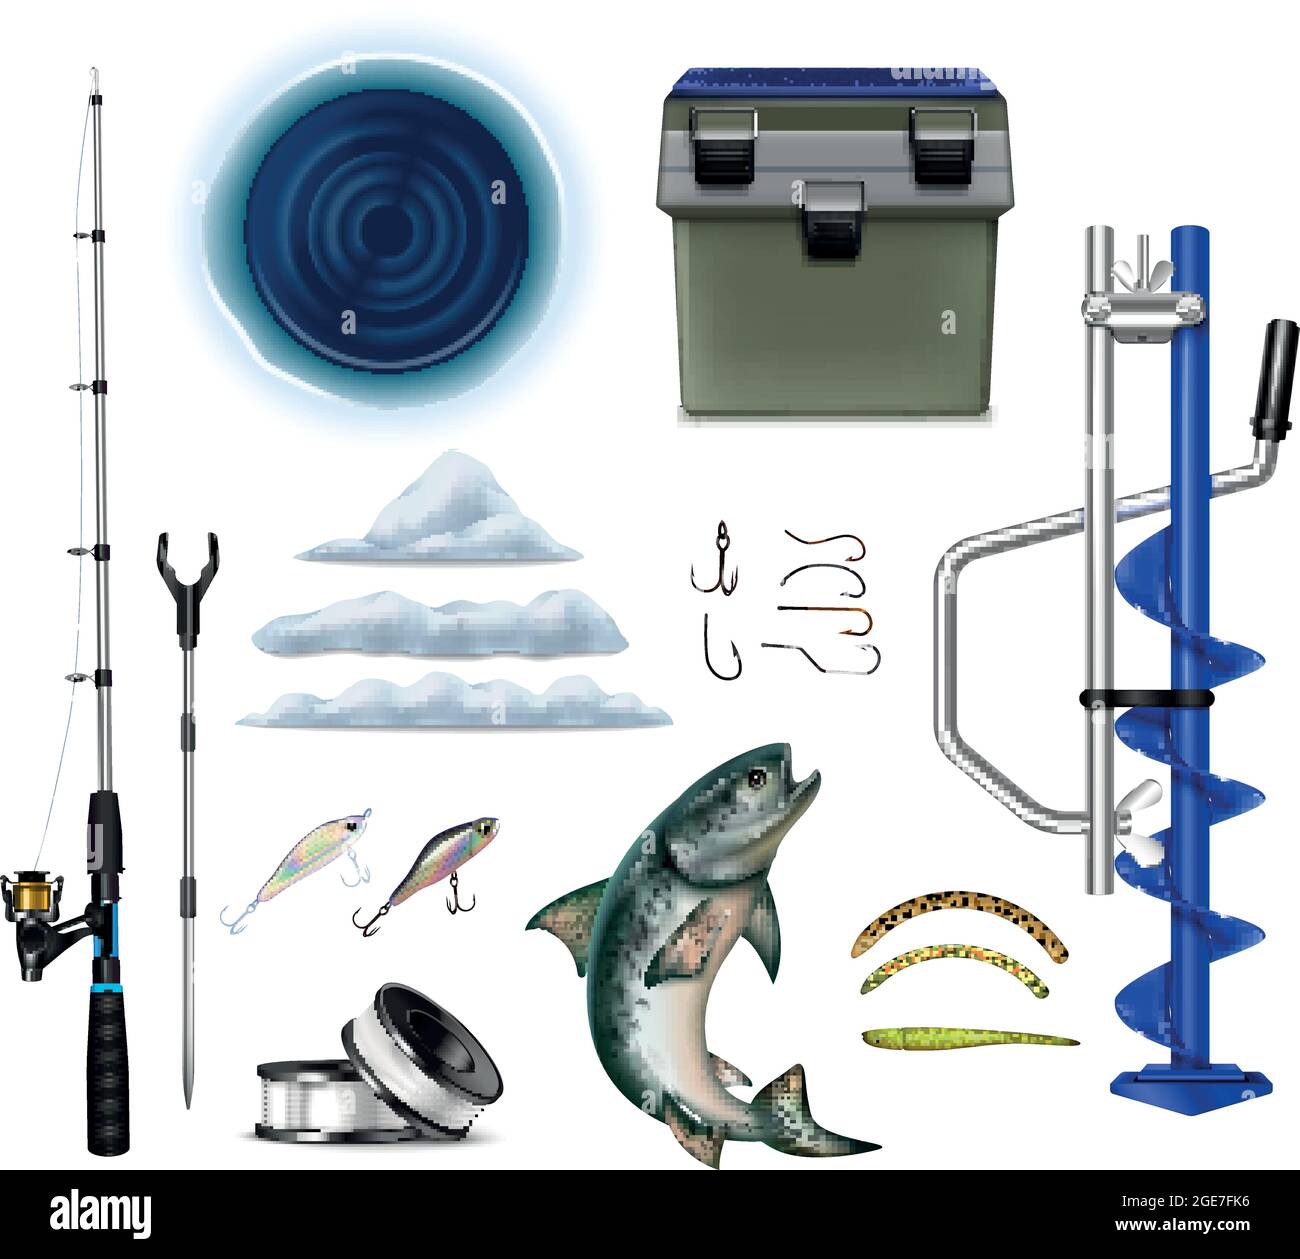 Ice fishing rod and reel Stock Vector Images - Alamy